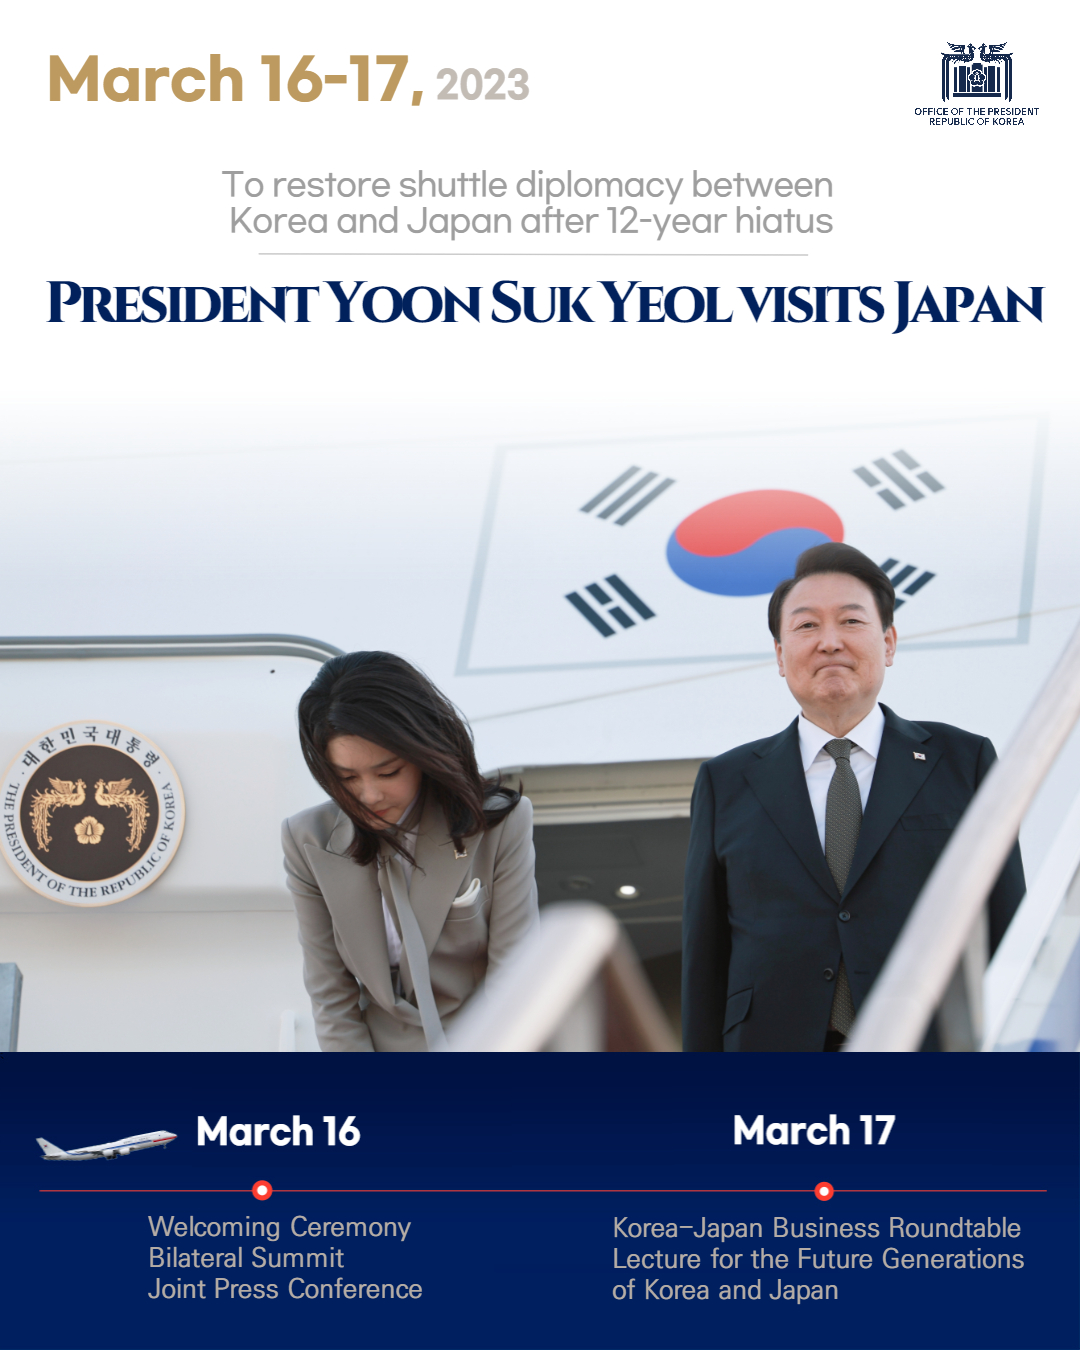 President Yoon Suk Yeol’s Visit to Restore Shuttle Diplomacy with Japan after 12-Year Hiatus